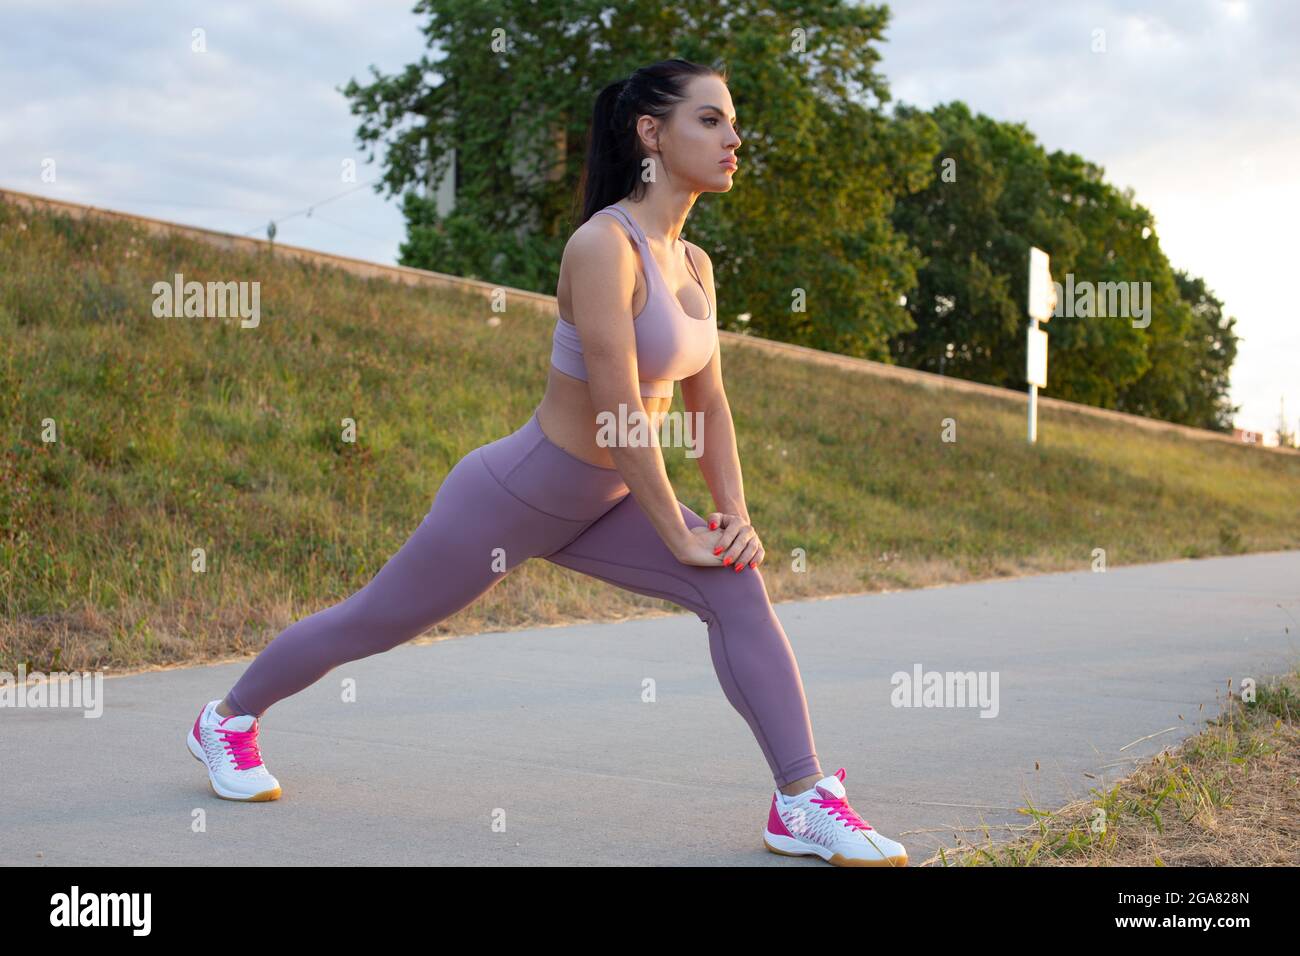 Young Caucasian woman doing lunge warm up exercise at embankment before running Stock Photo